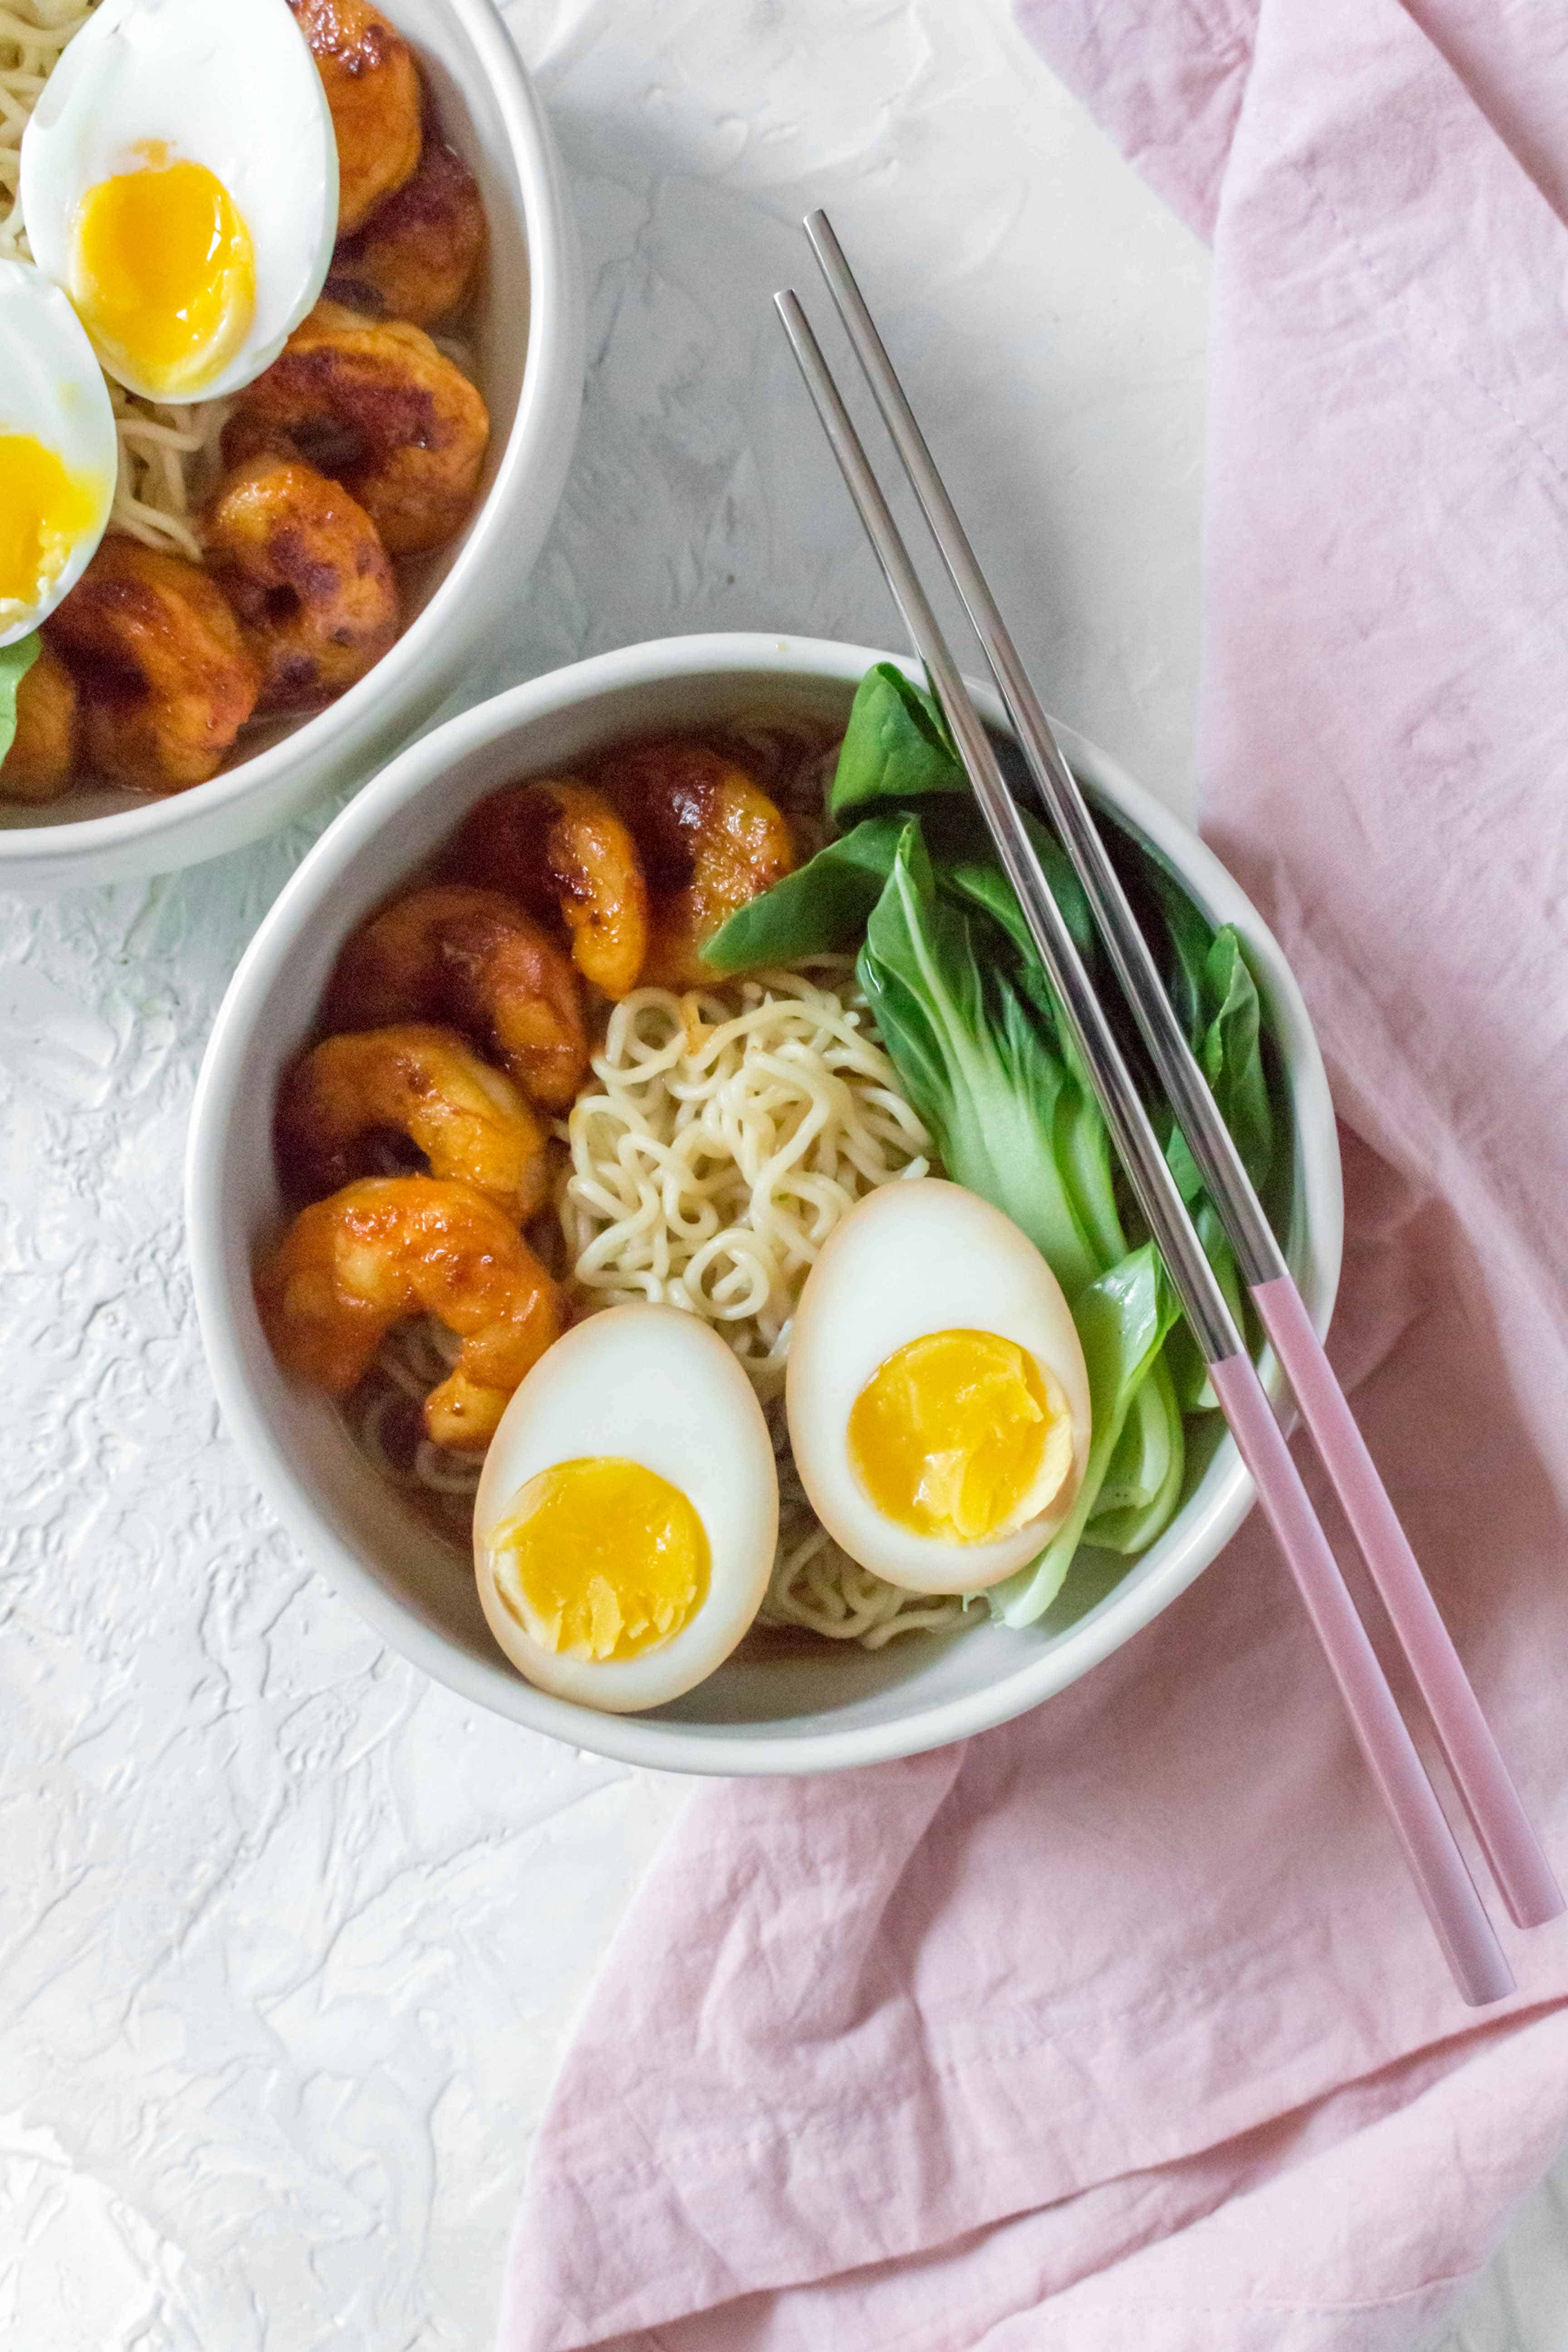 Want to give your boring Instant Ramen an upgrade? Here's how to make your Instant Ramen taste amazing and healthier!